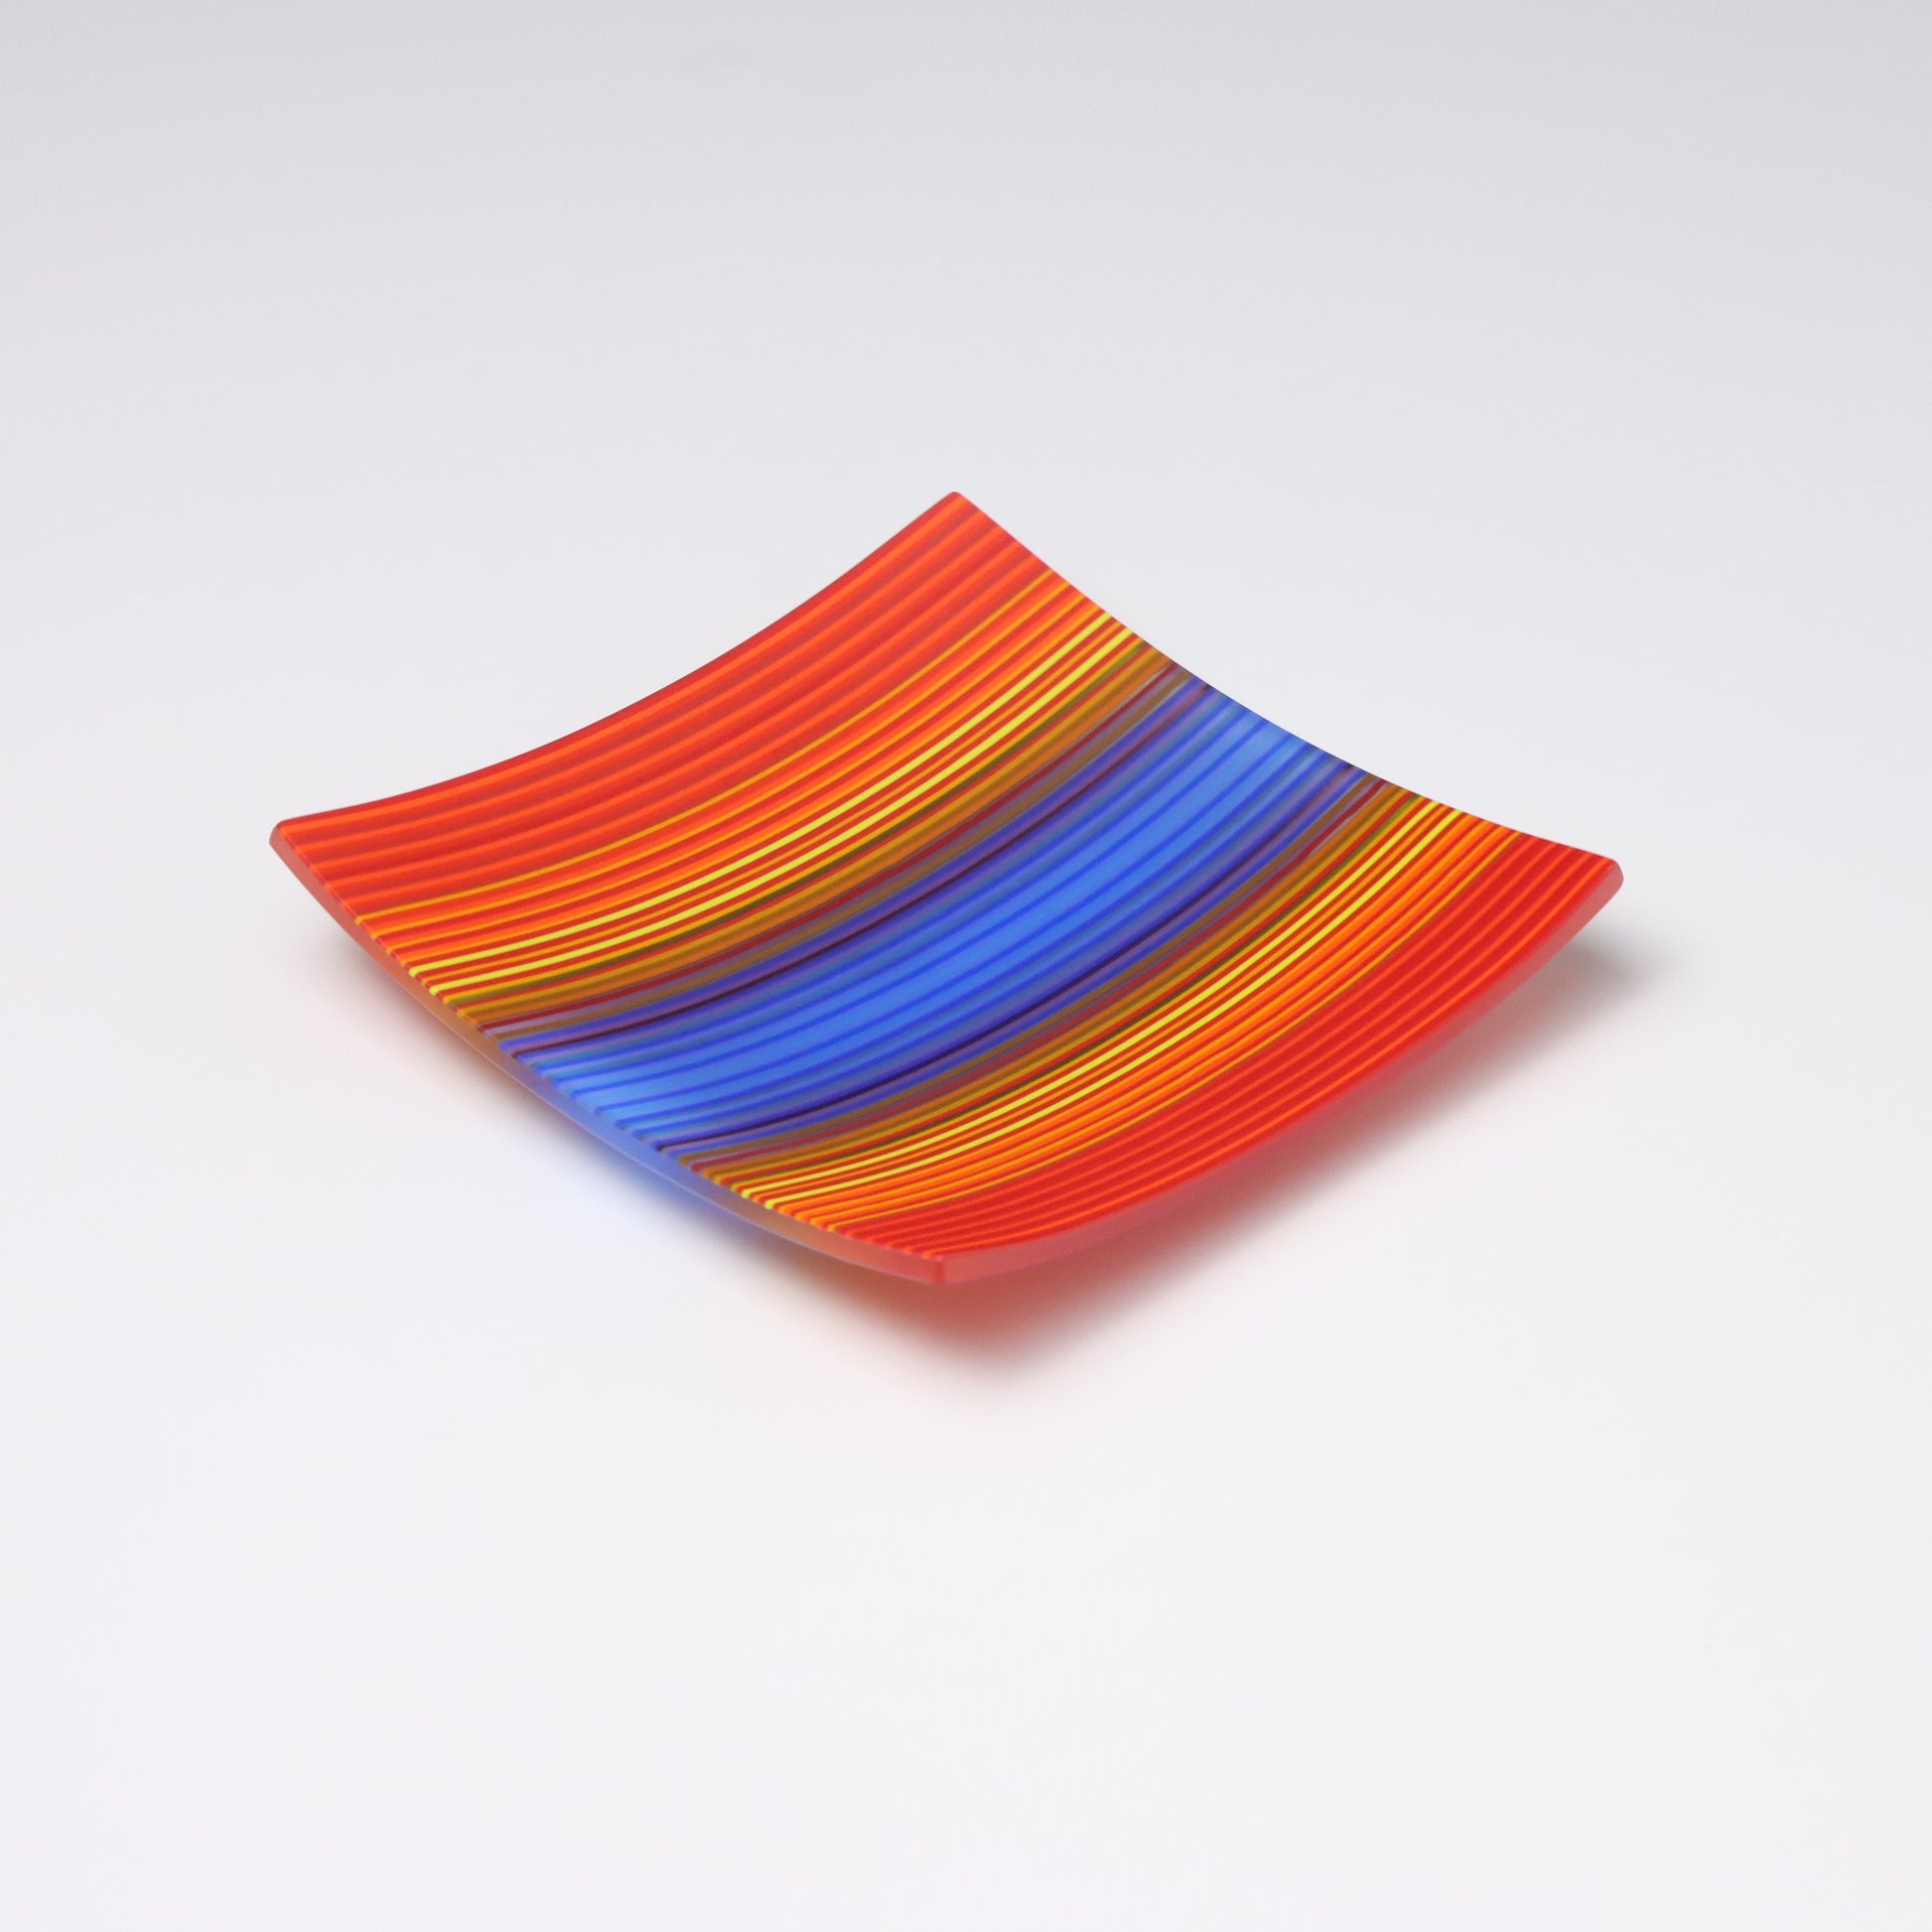 A ColourWave Glass fused  glass plate featuring a vibrant array of stripes in shades of red, orange, blue, and yellow. The plate has a square shape with upturned corners and is set against a plain white background. The pattern and the bright colours create an eye-catching visual effect that showcases the intricate craftsmanship of fused glass technique in the UK